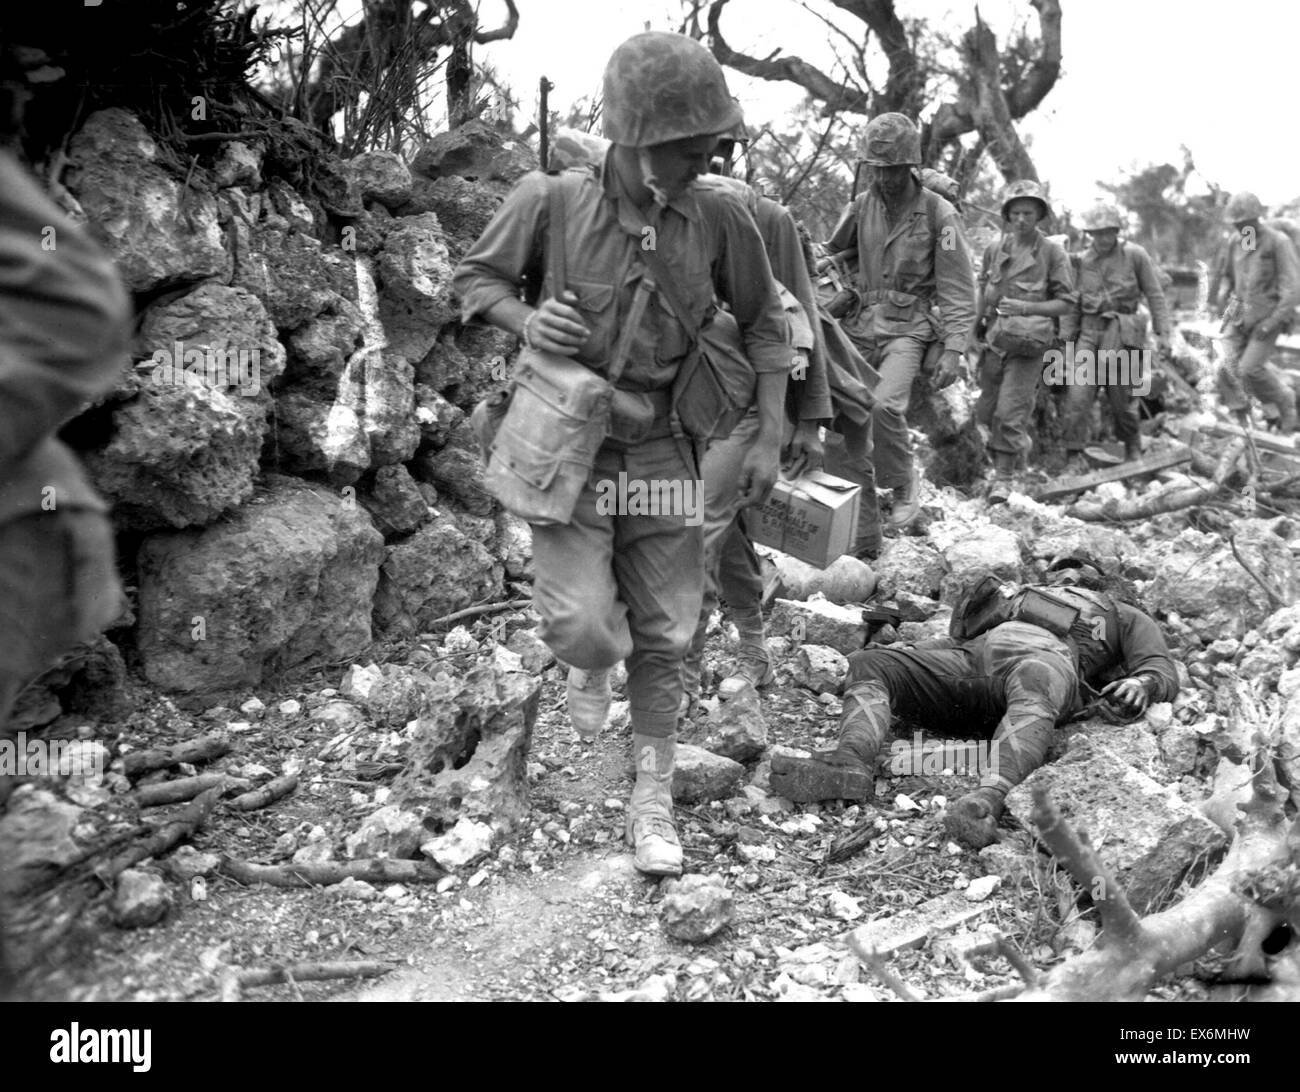 Okinawa U.S. Marines pass a dead Japanese soldier in a destroyed village, during World War two 1945 Stock Photo